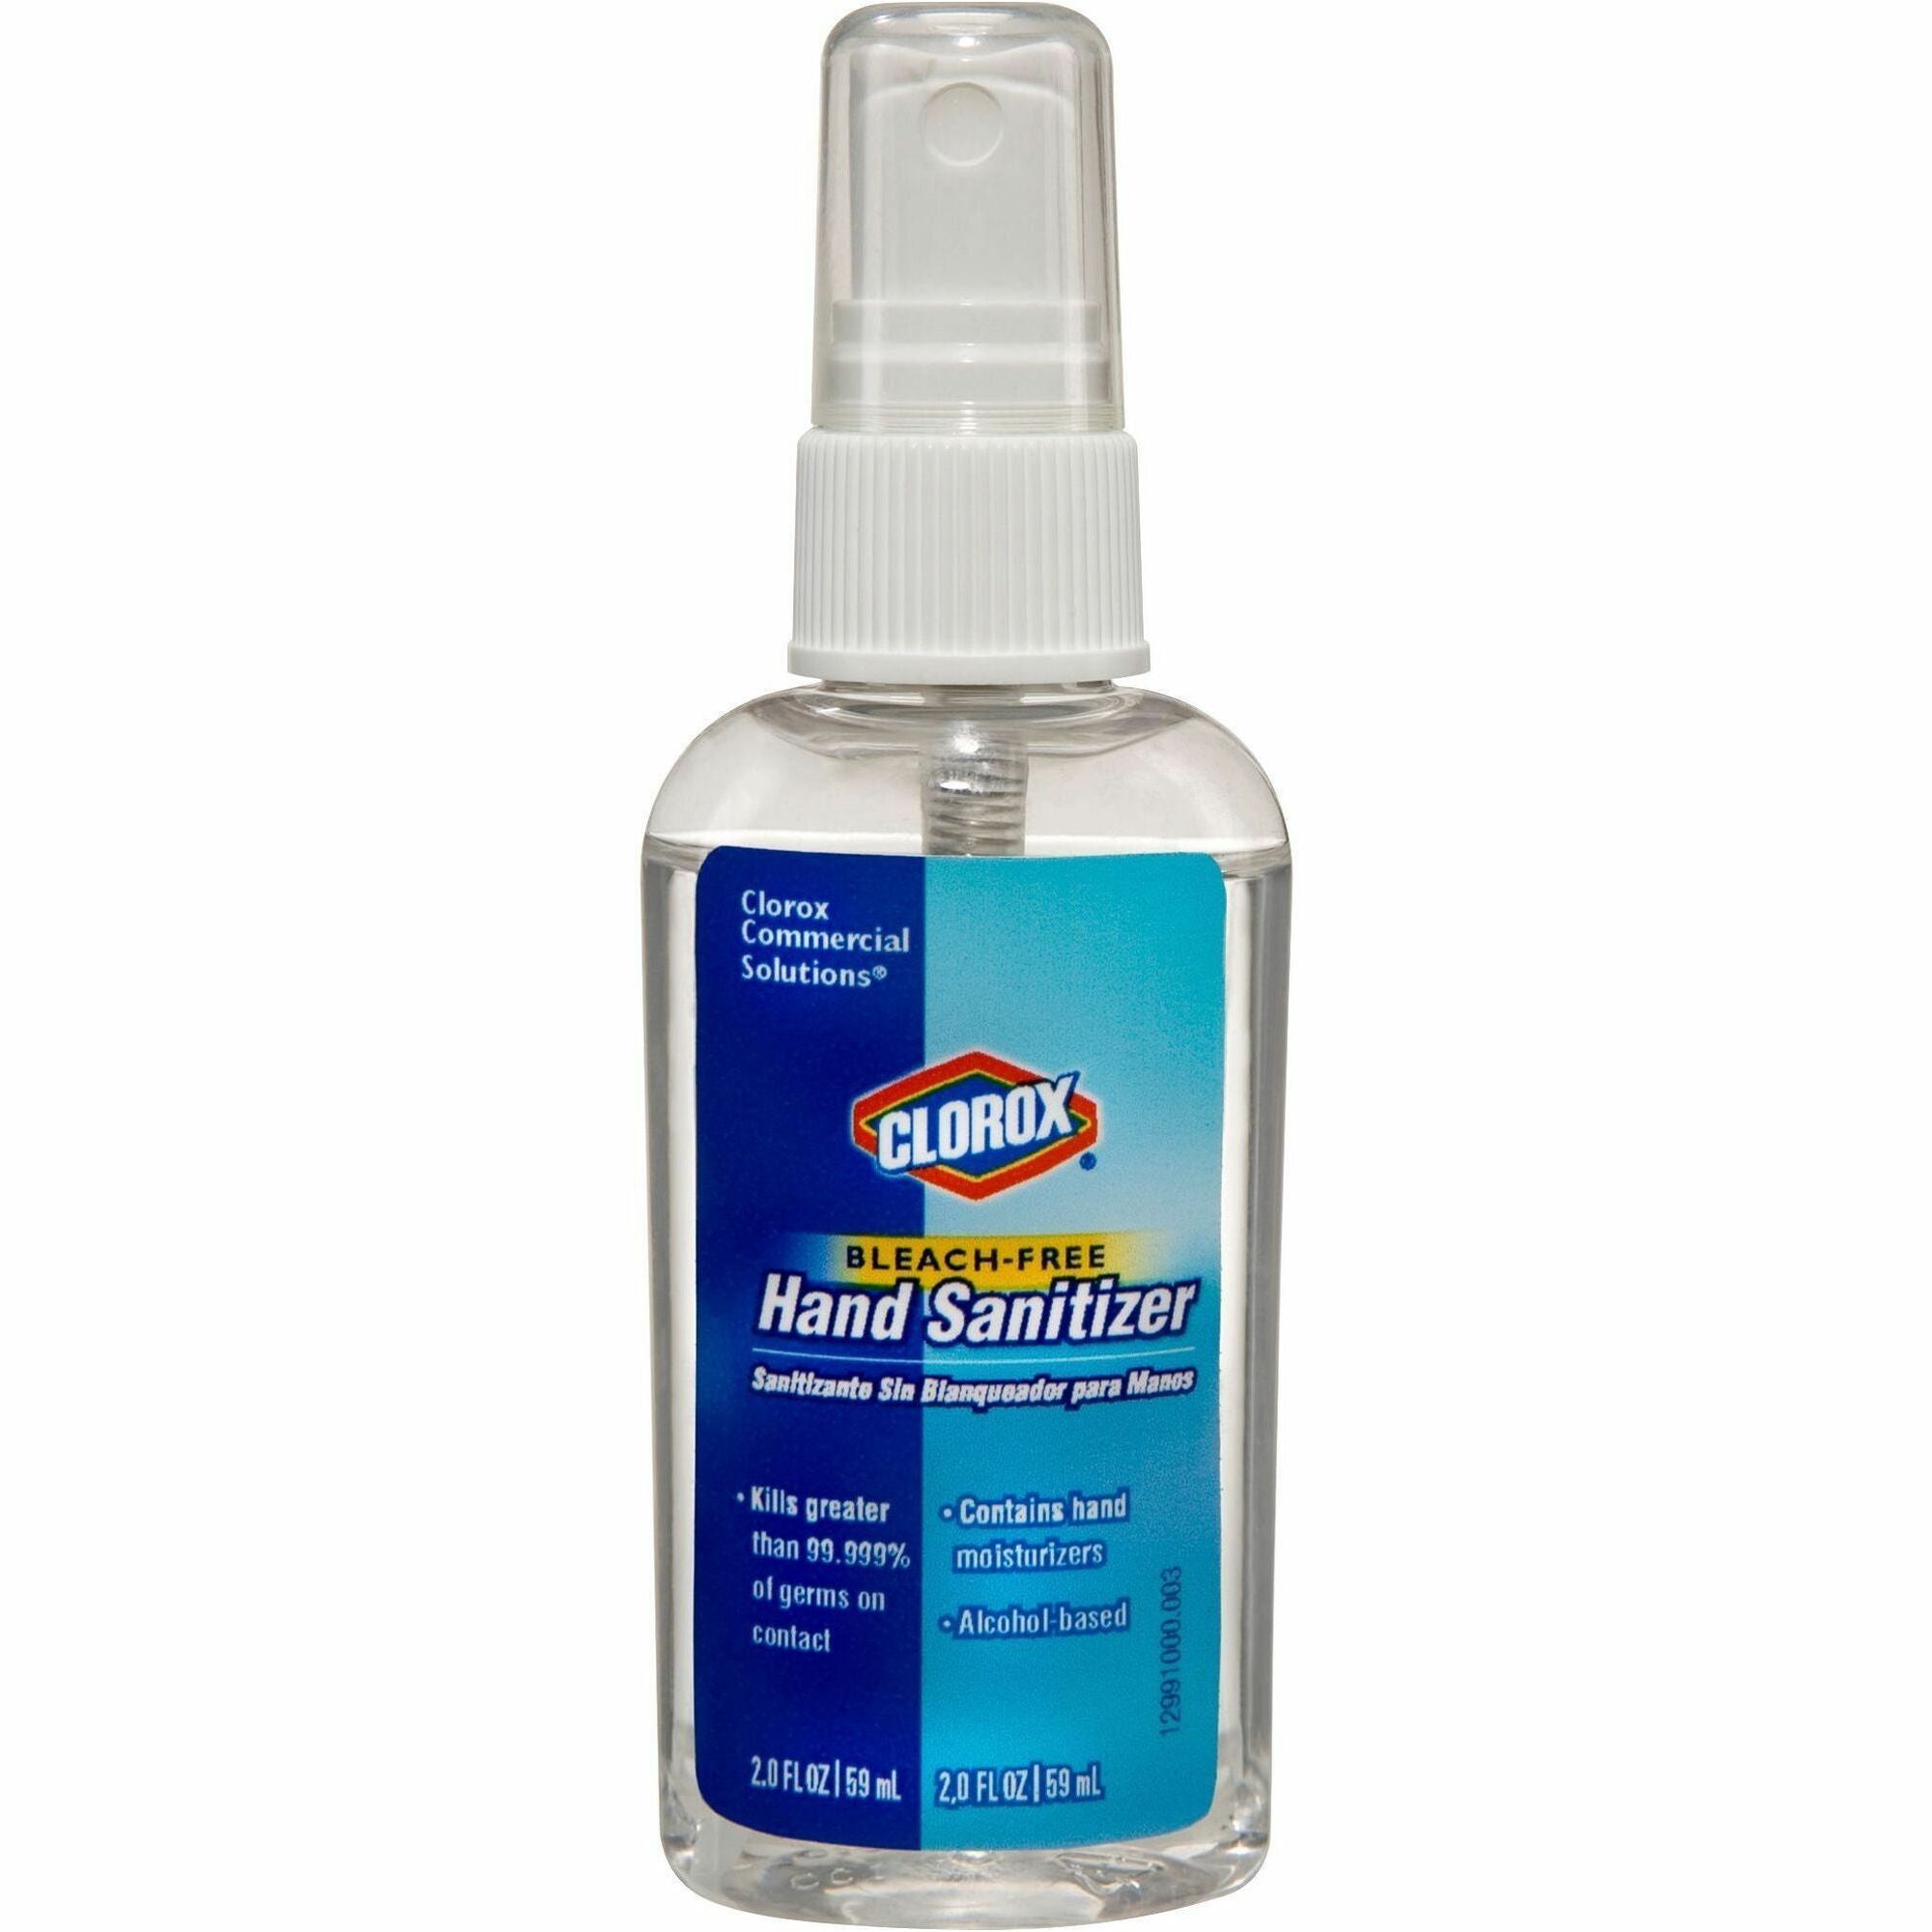 clorox-commercial-solutions-hand-sanitizer-spray-2-fl-oz-591-ml-spray-bottle-dispenser-kill-germs-hand-moisturizing-clear-bleach-free-non-sticky-non-greasy-5208-pallet_clo02174pl - 1